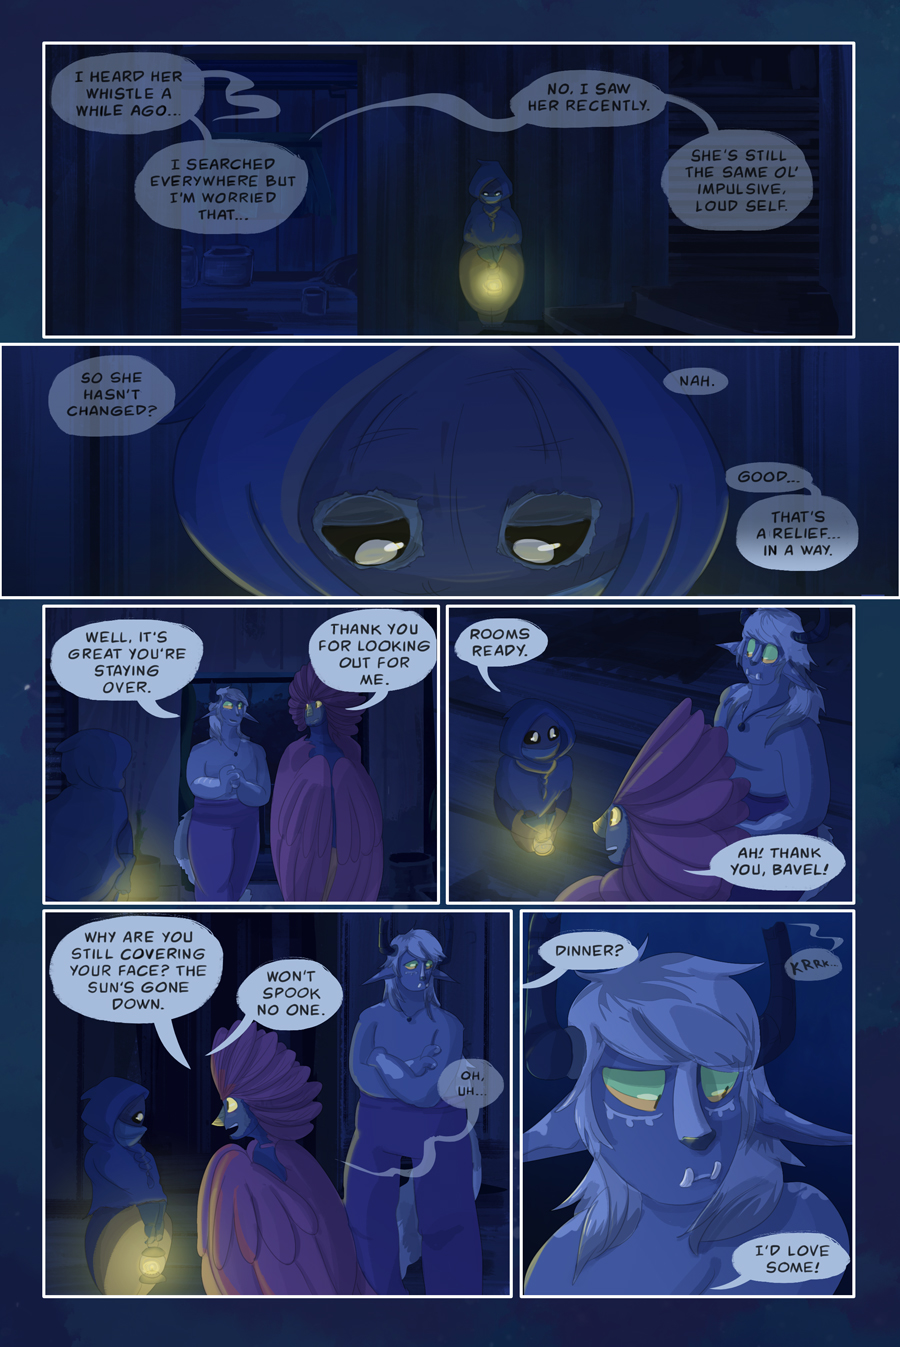 Chapter 6, page 7